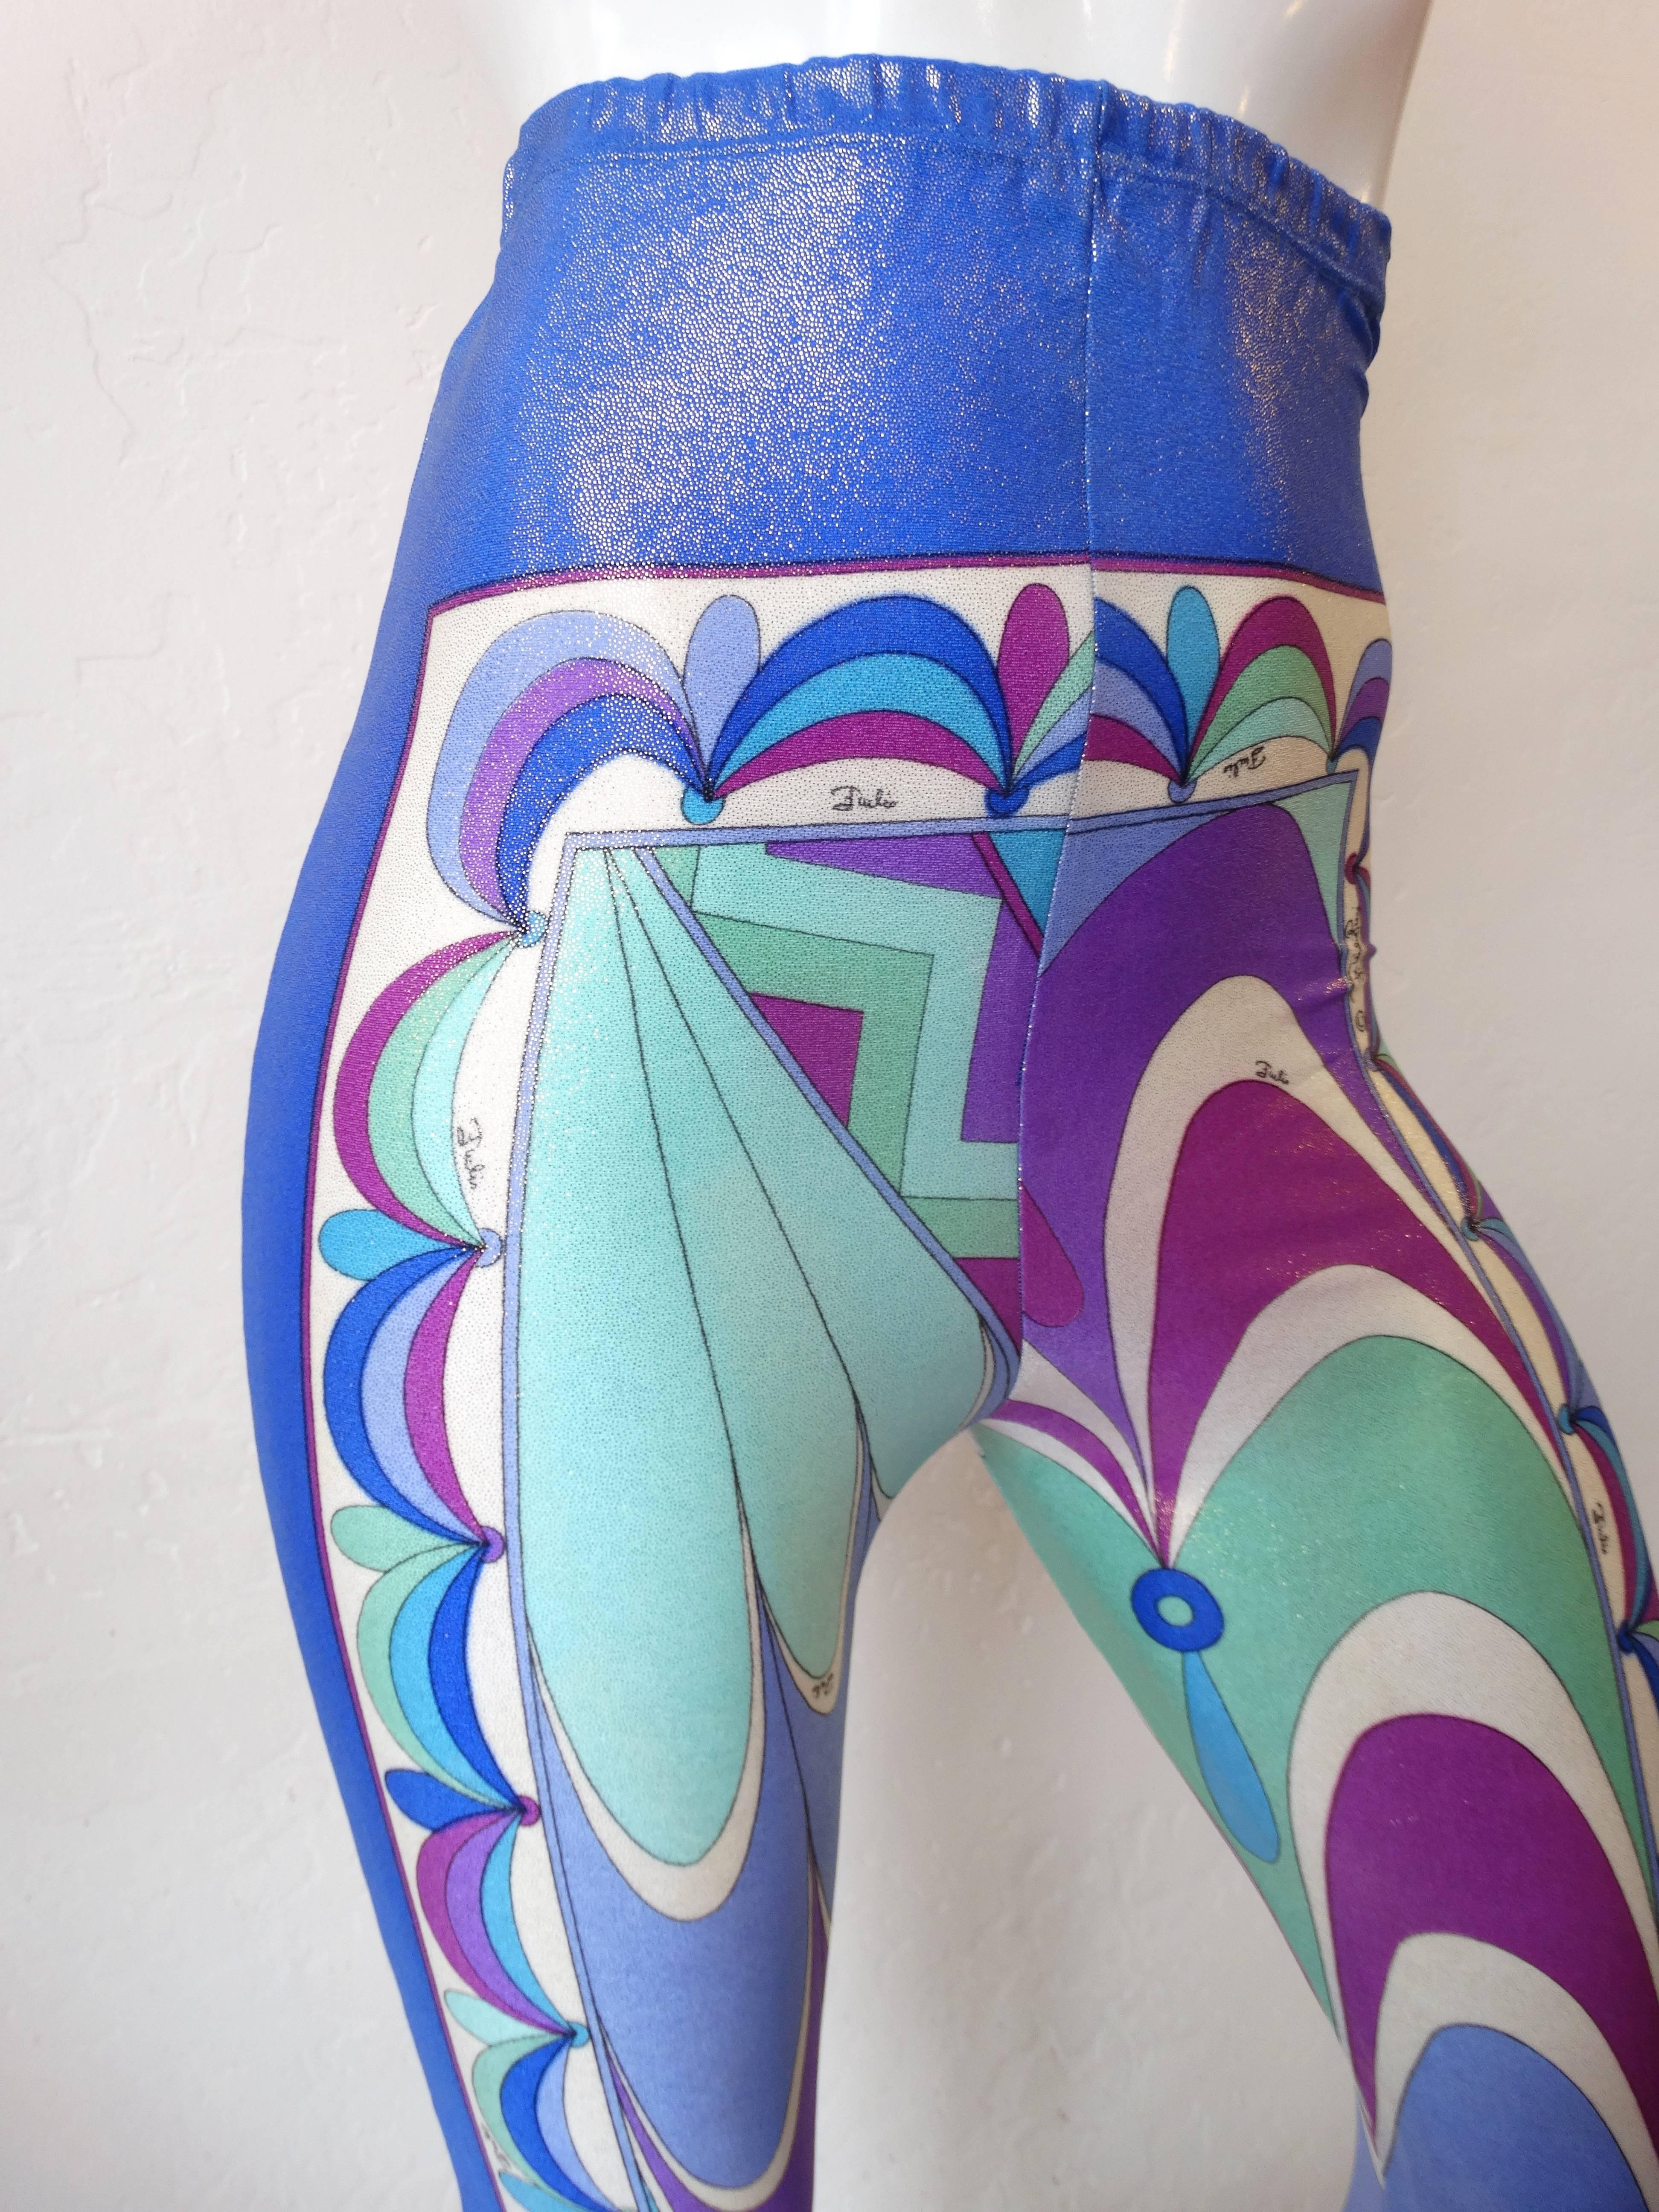 Incredible 1960s high rise leggings from iconic designer Emilio Pucci! Made of super stretchy iridescent fabric printed with the signature Pucci swirls- in shades of blue, teal, and violet. Elasticized waist allows for a customized fit. Original